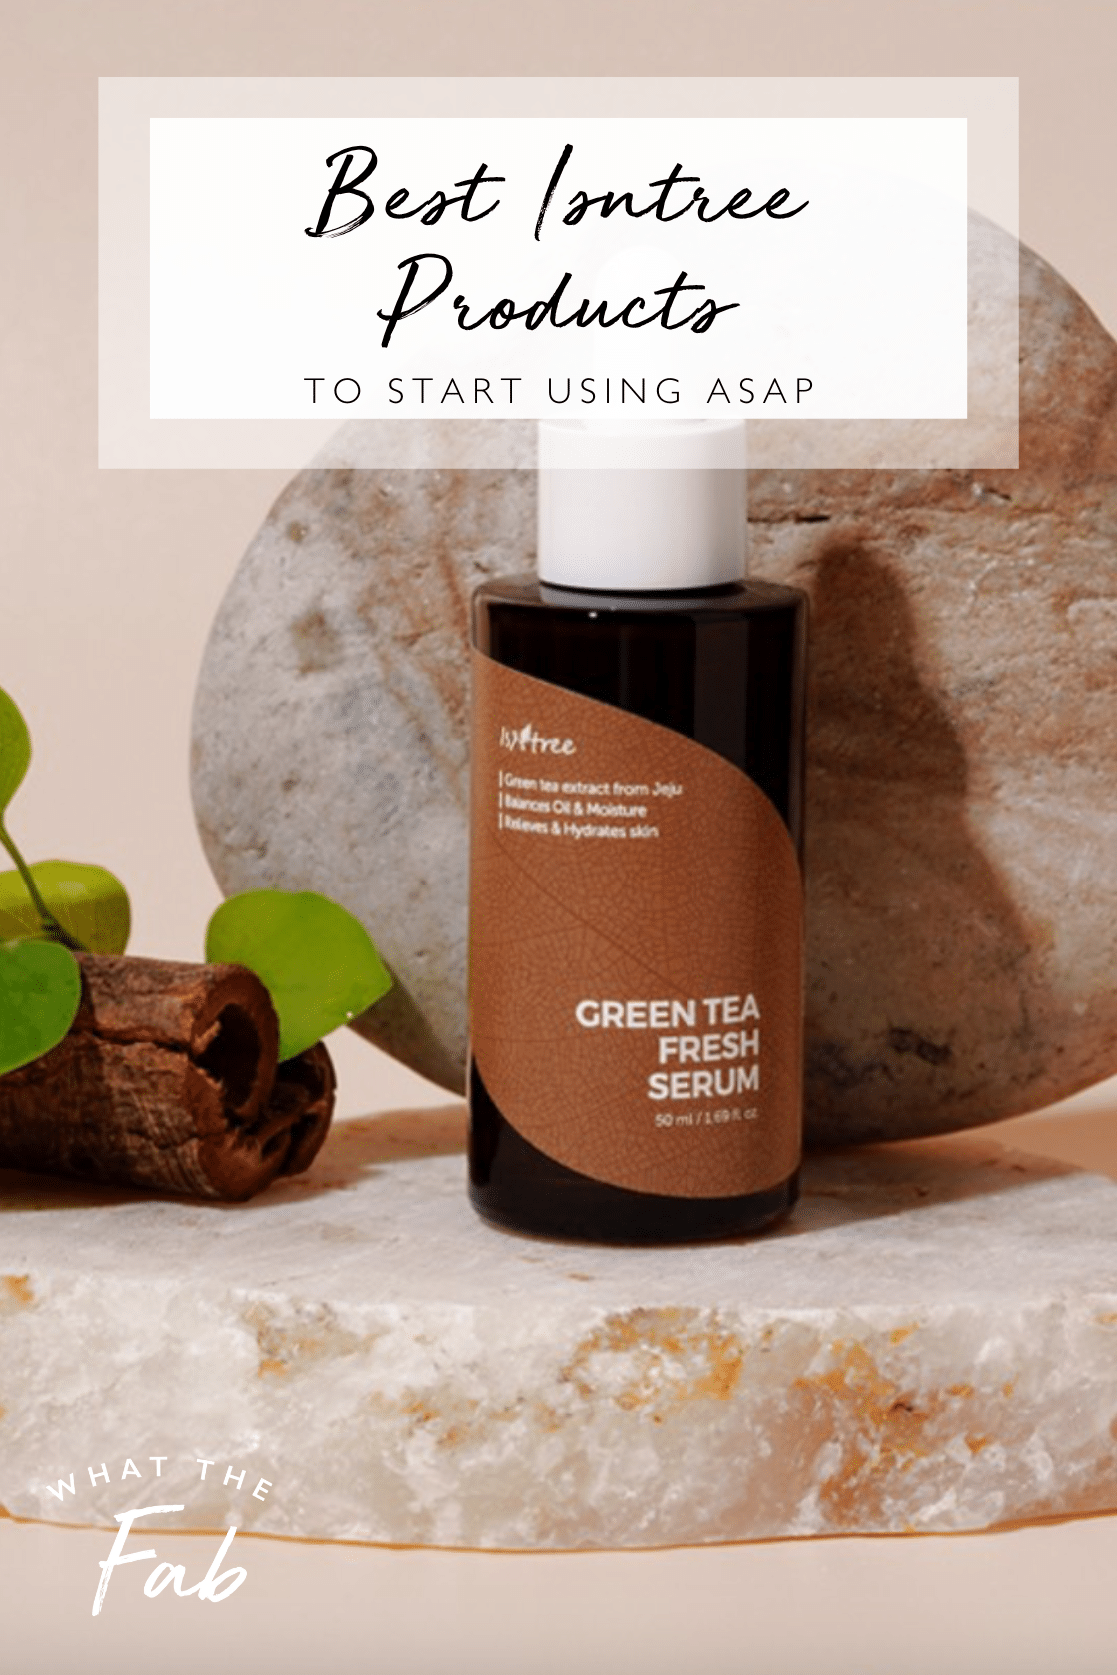 7 best Isntree products, by beauty blogger What The Fab